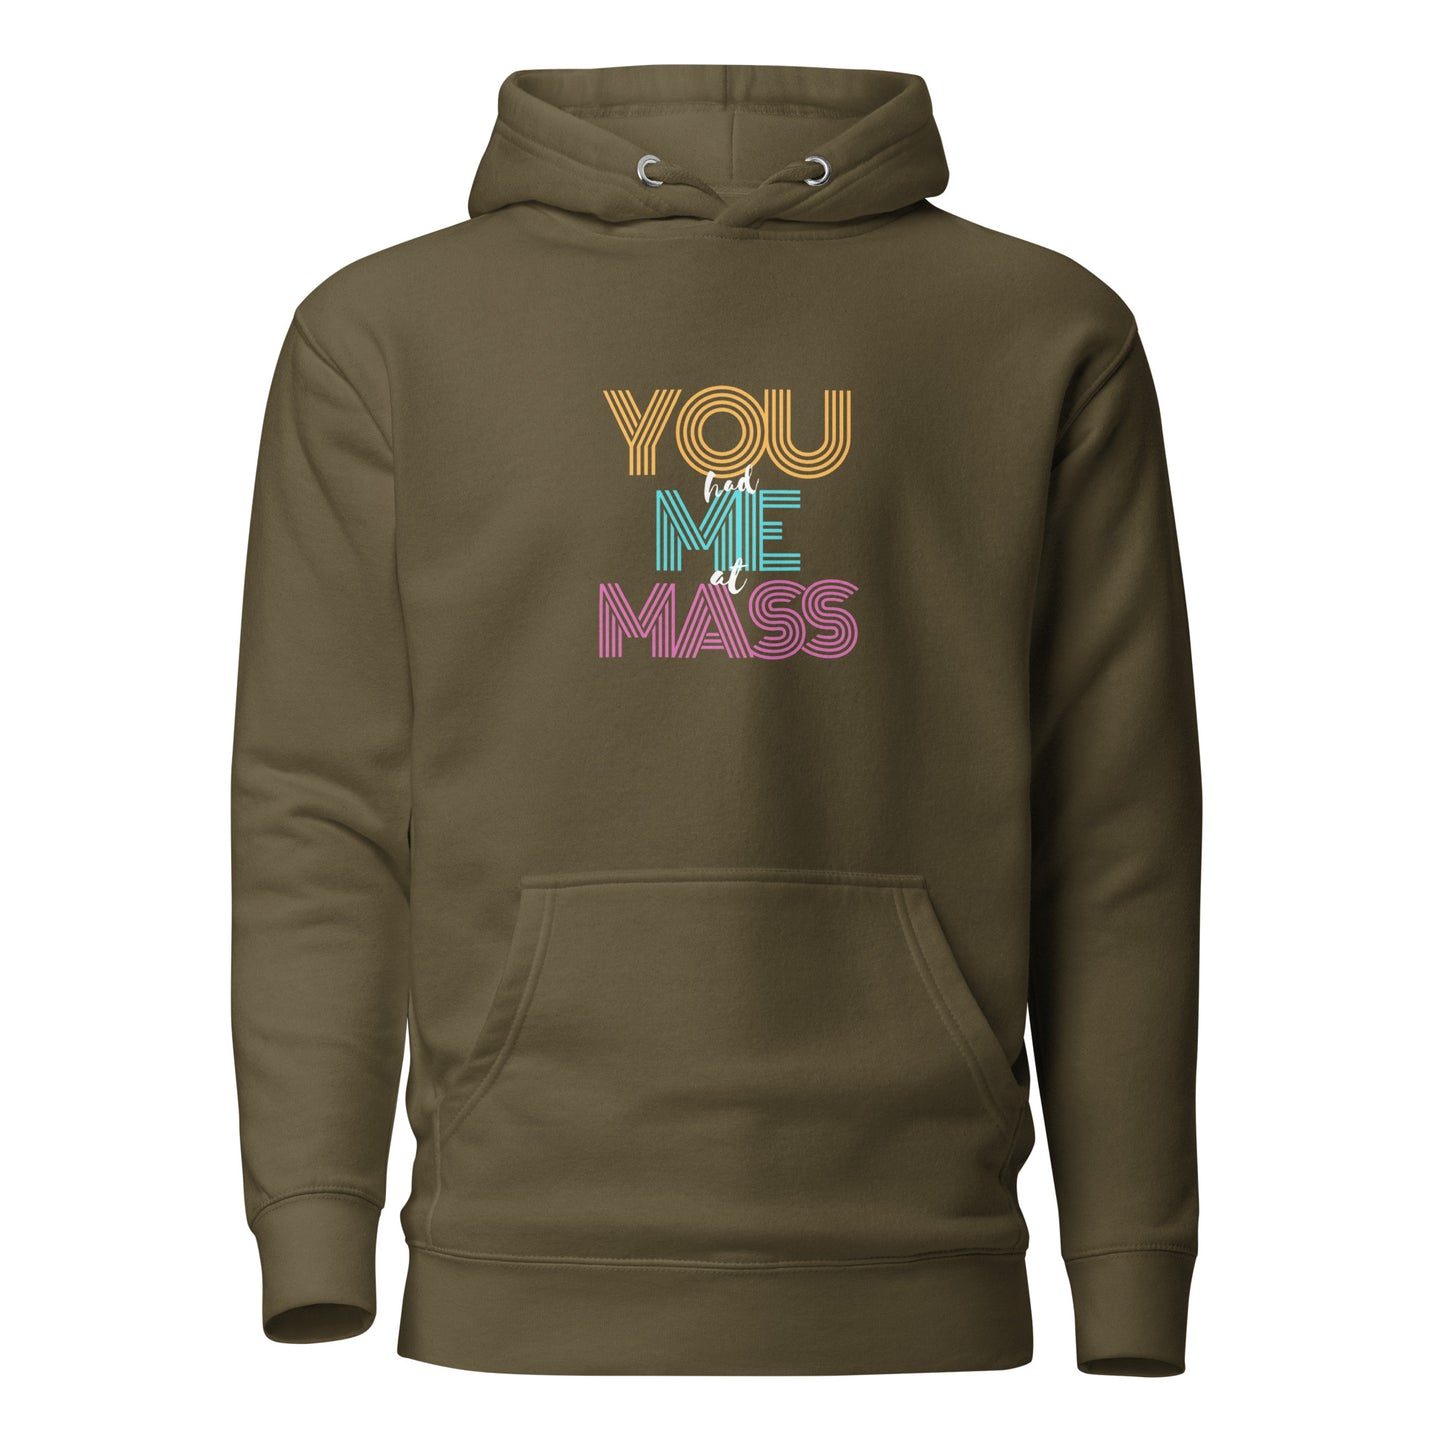 "You Had Me At Mass" - Unisex Hoodie